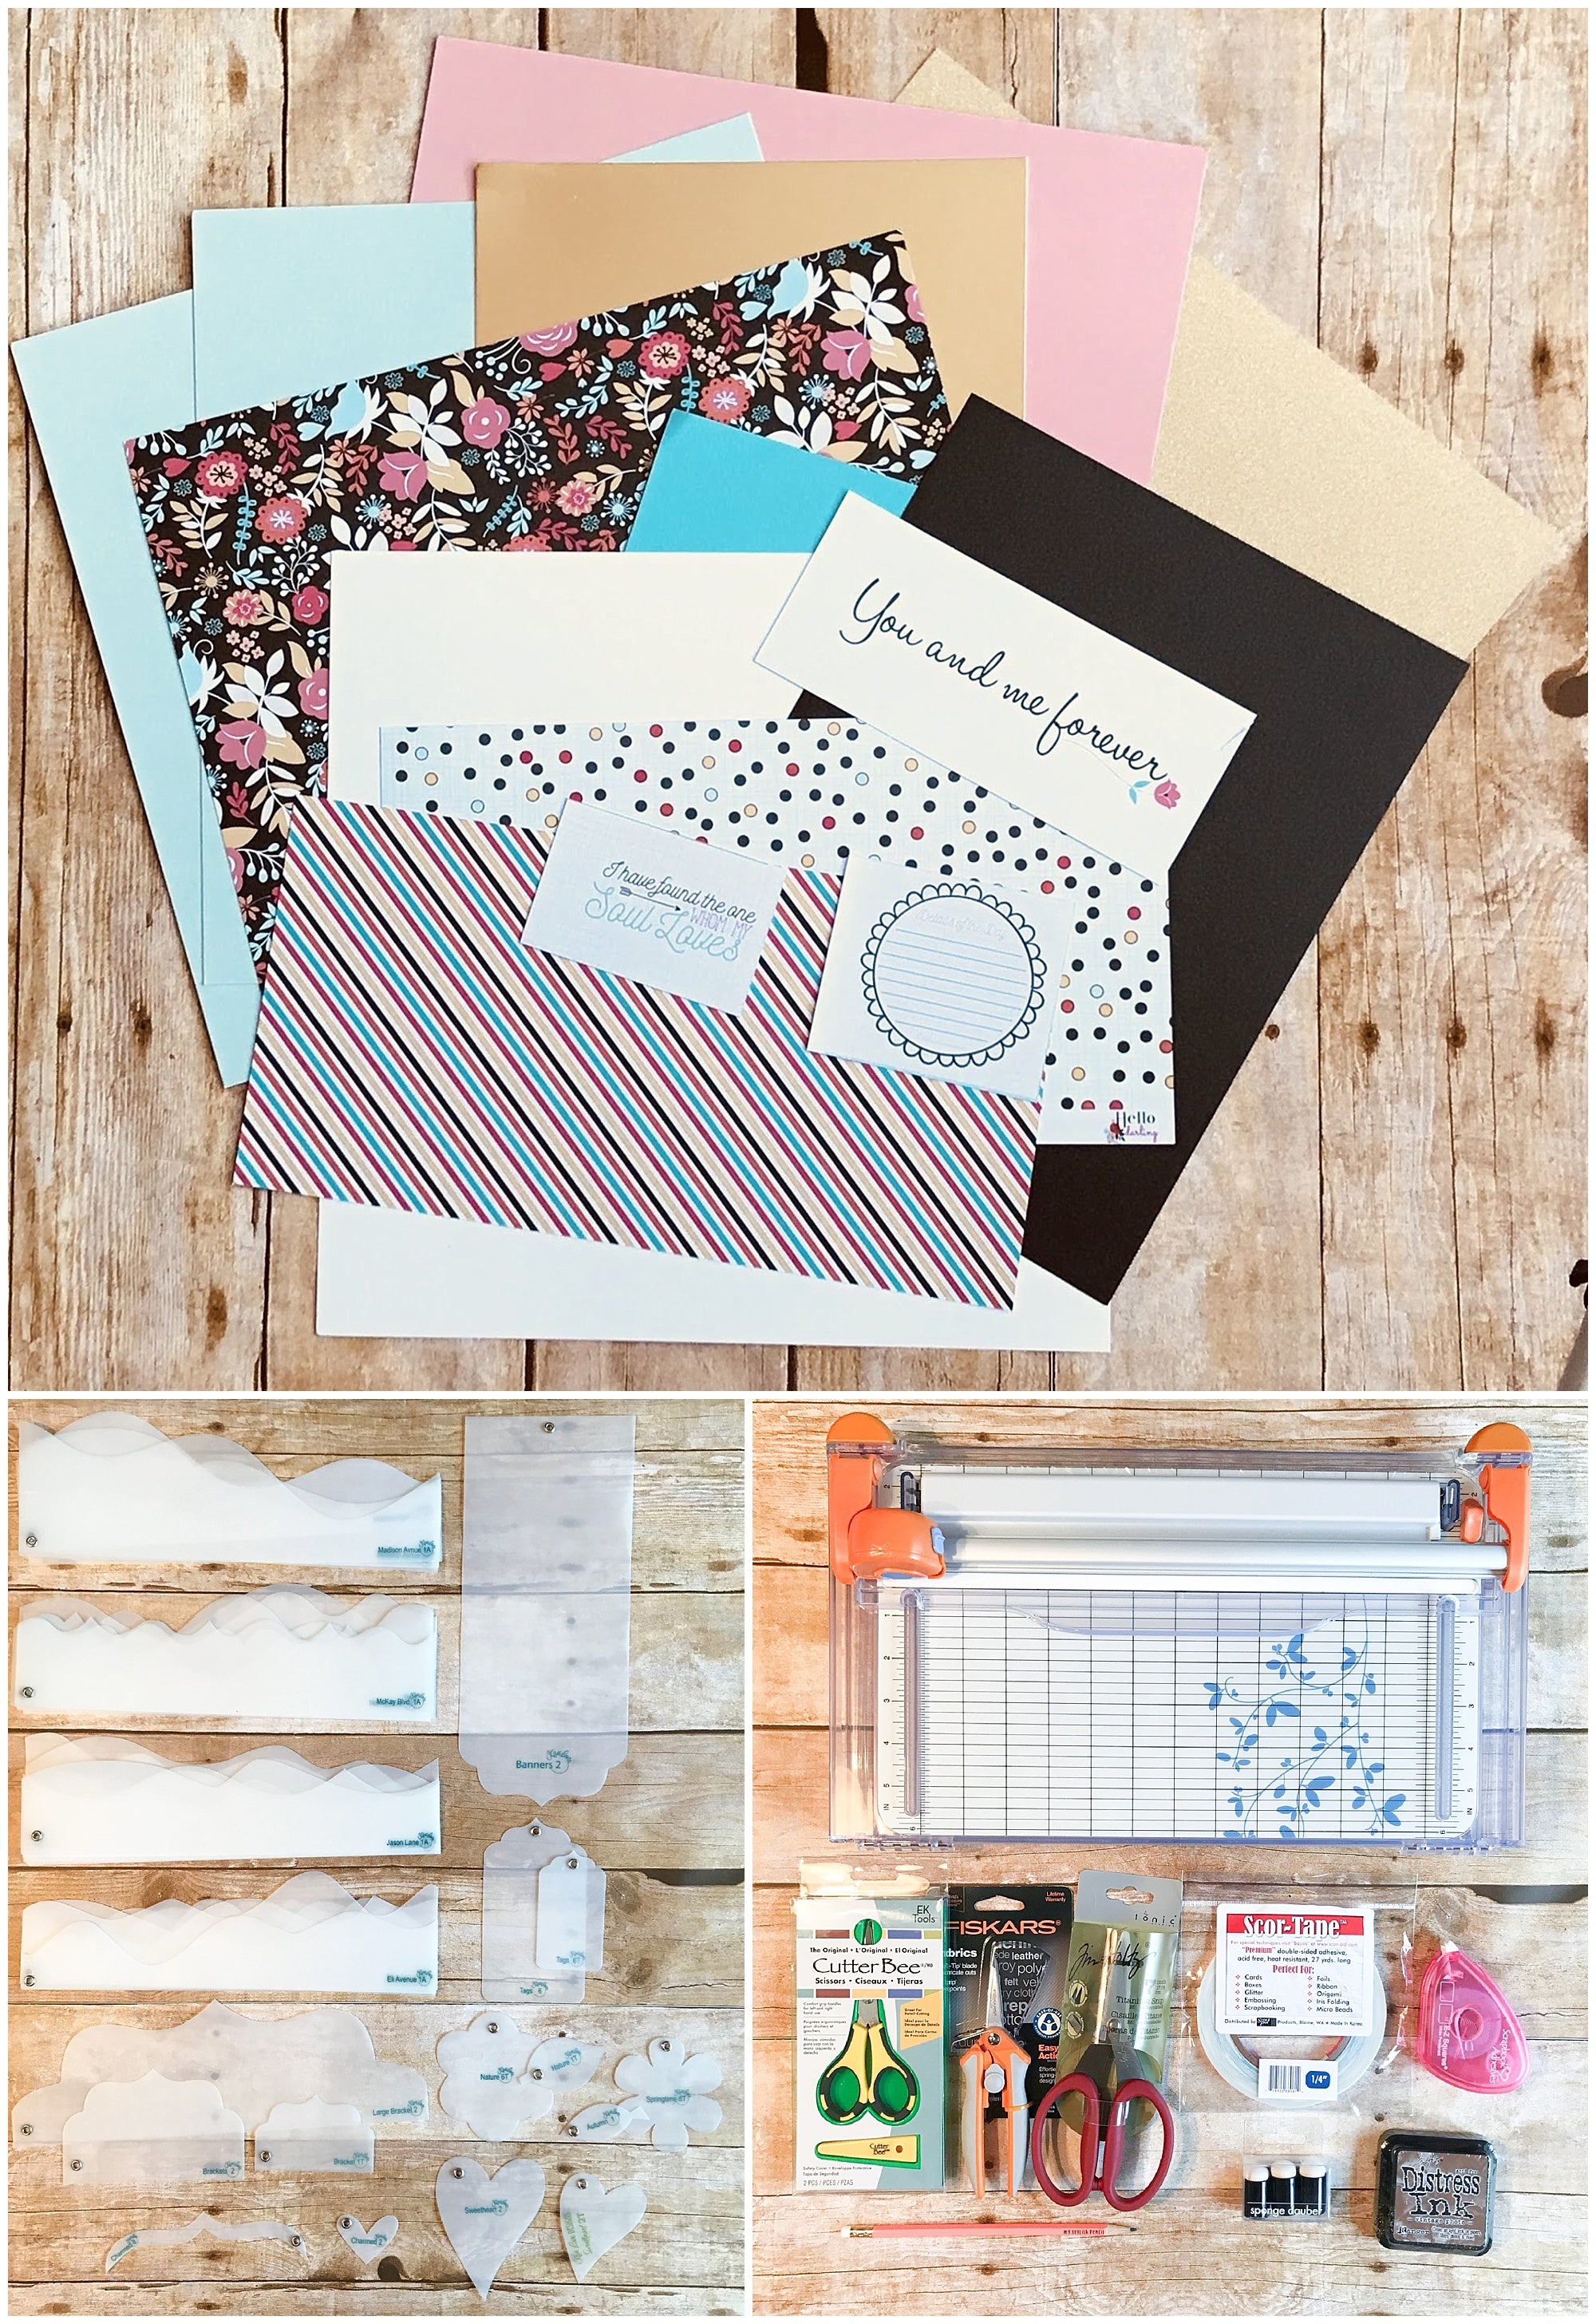 12 Must Have Supplies for Scrapbooking Beginners - Crafts 101